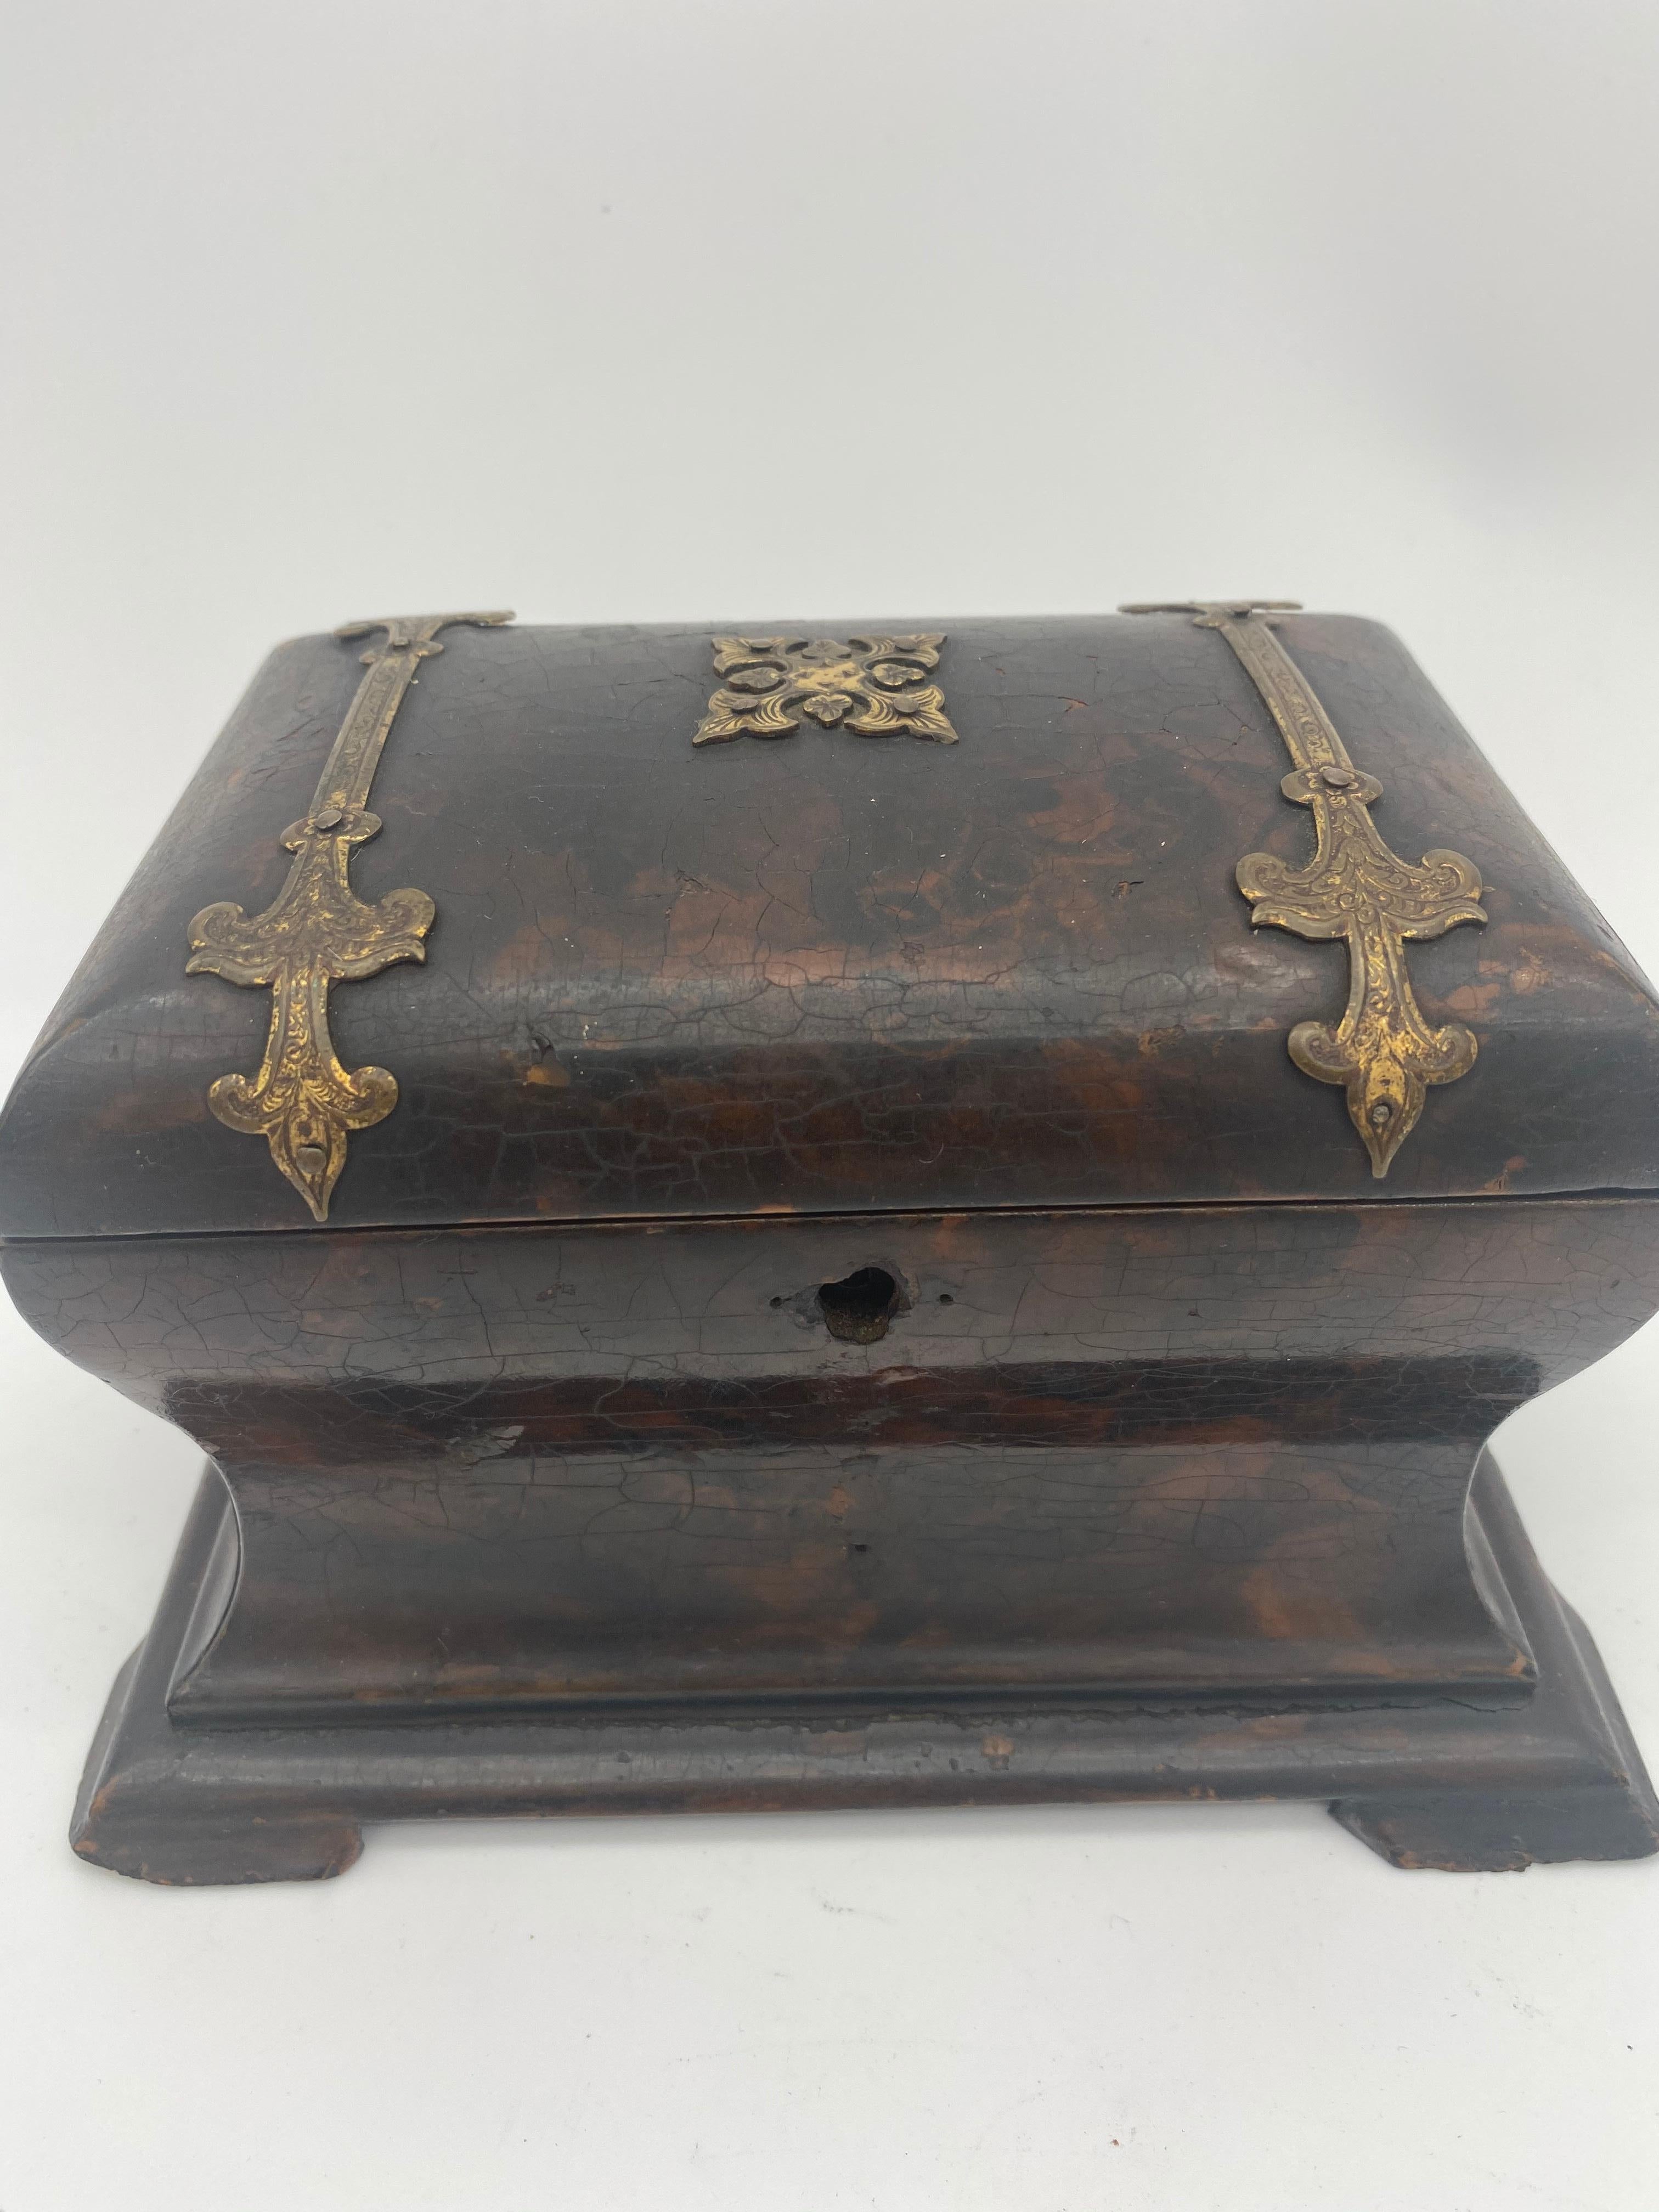 19th century lacquer tea caddy with brass ornaments. Has got an mahogany flamed color. Brass ornaments. Thick layer of lacquer over wood. Very good quality wood and is very beautiful. Some chips and age cracks. No key.